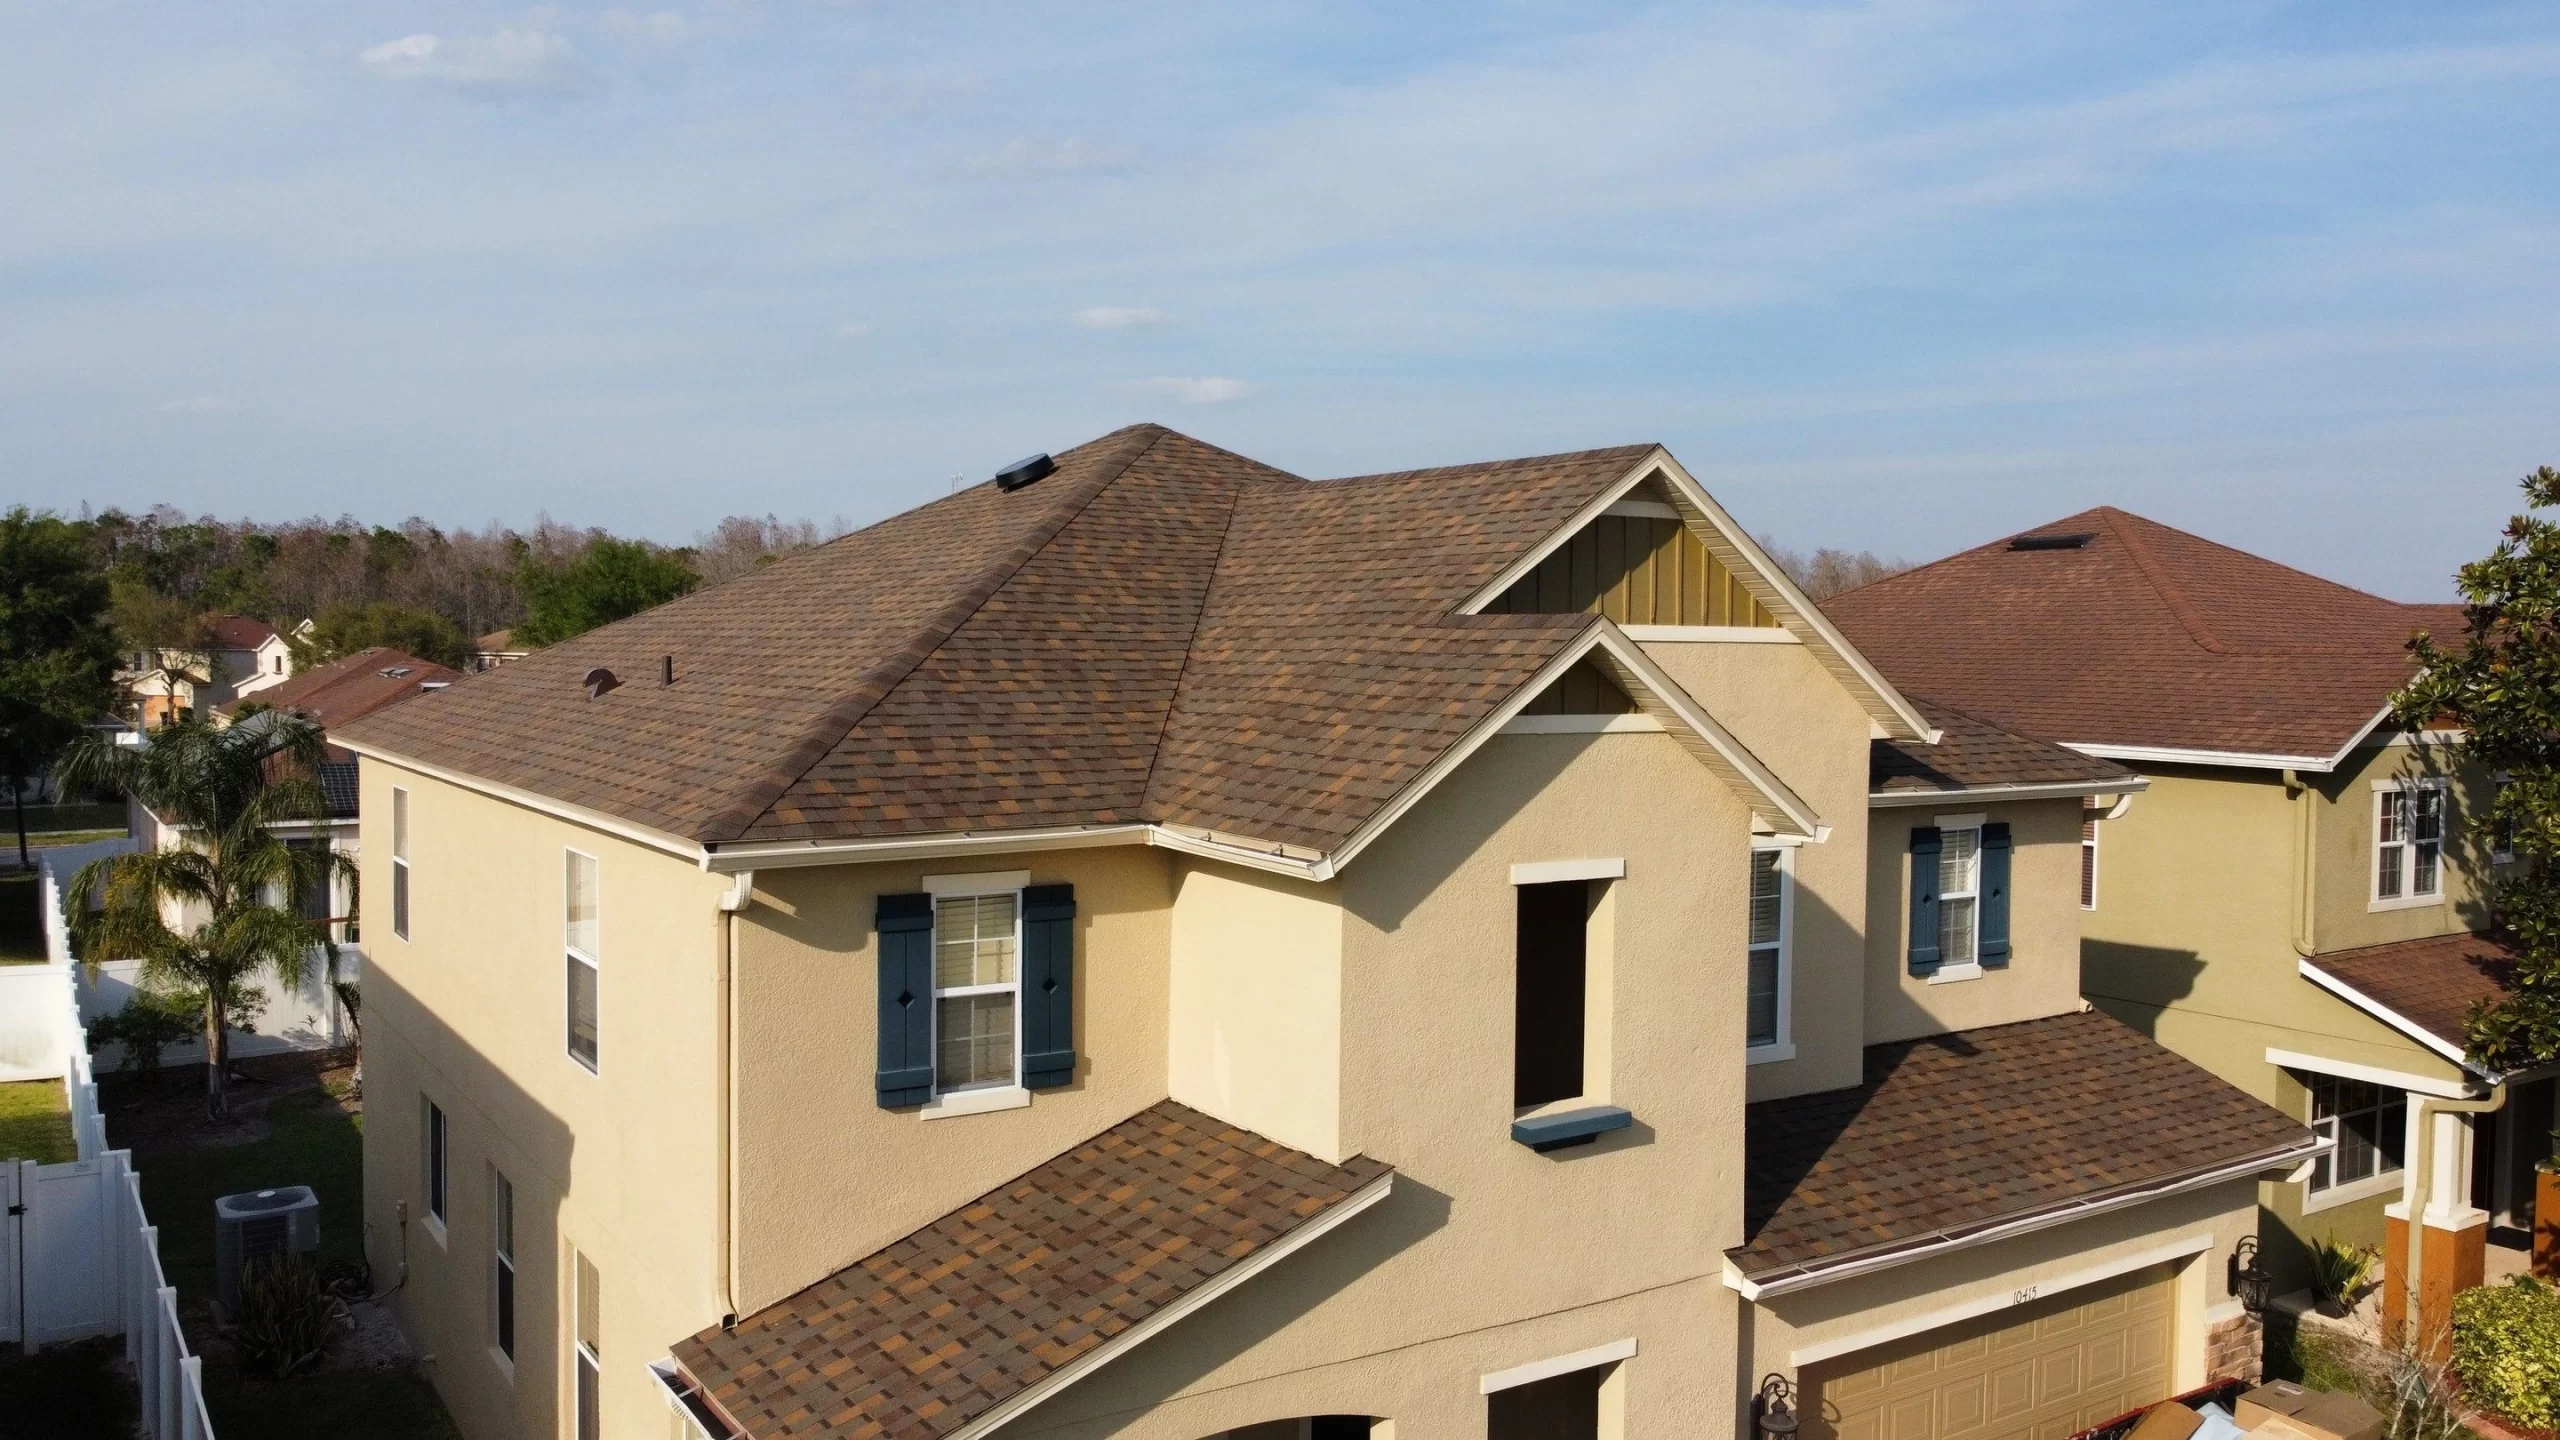 A multi-level asphalt shingle installation on a home in Longwood Florida installed by Nine Square Roofing.